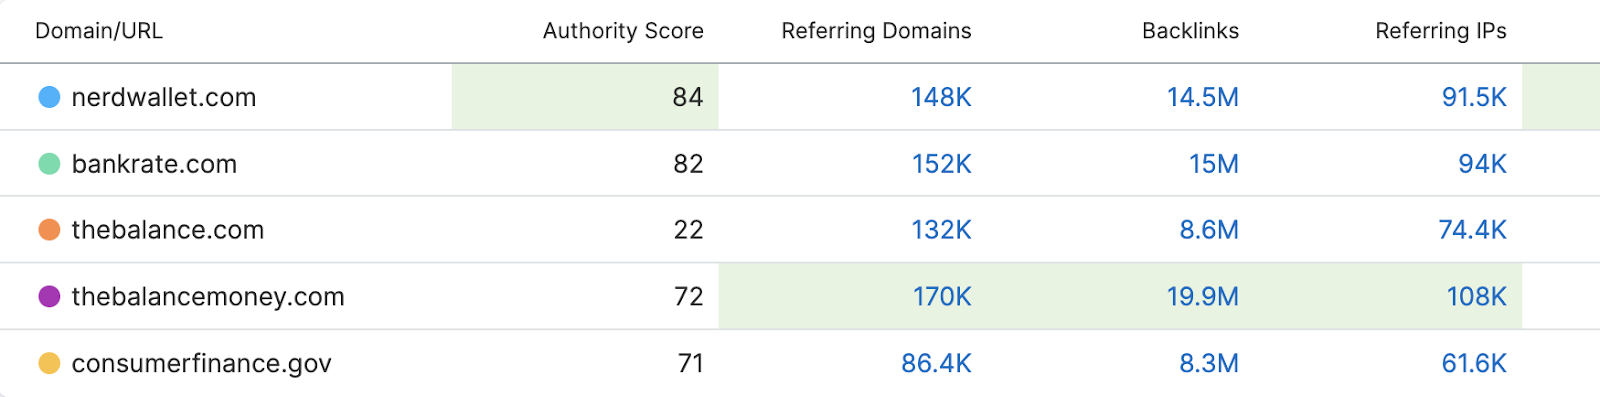 a table in the “Overview” tab with columns showing backlinks, referring domains, referring IPs and authority scores